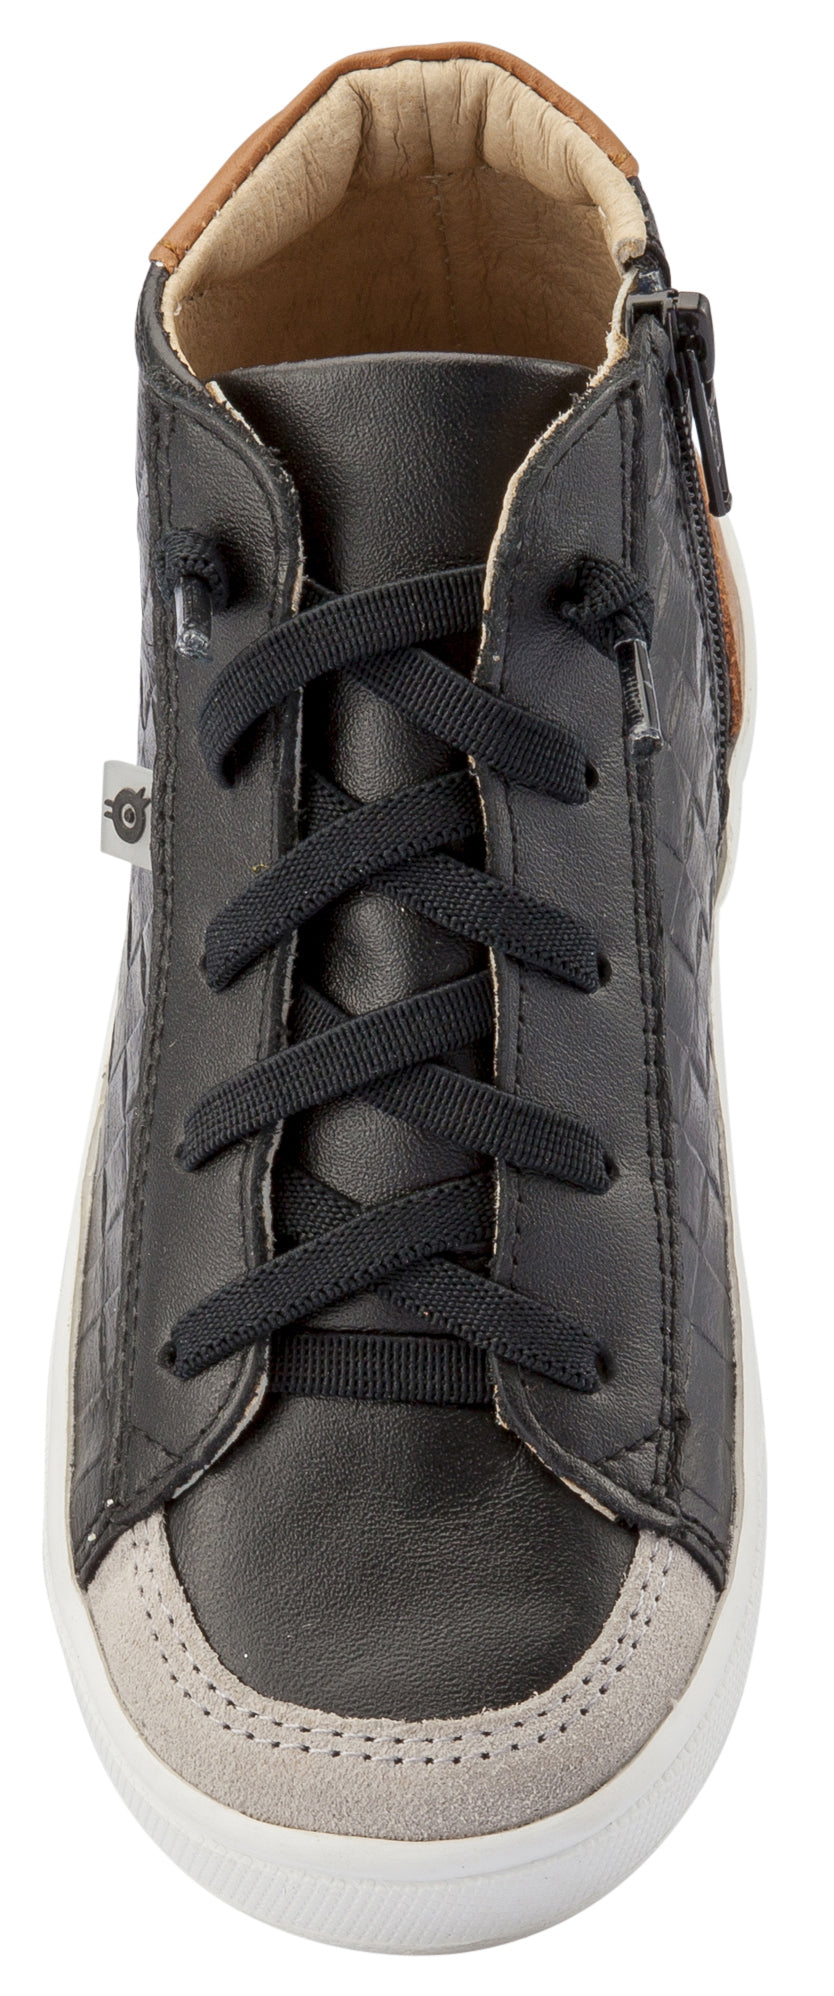 Old Soles Girl's and Boy's Penthouse Sneakers, Black Weave / Tan